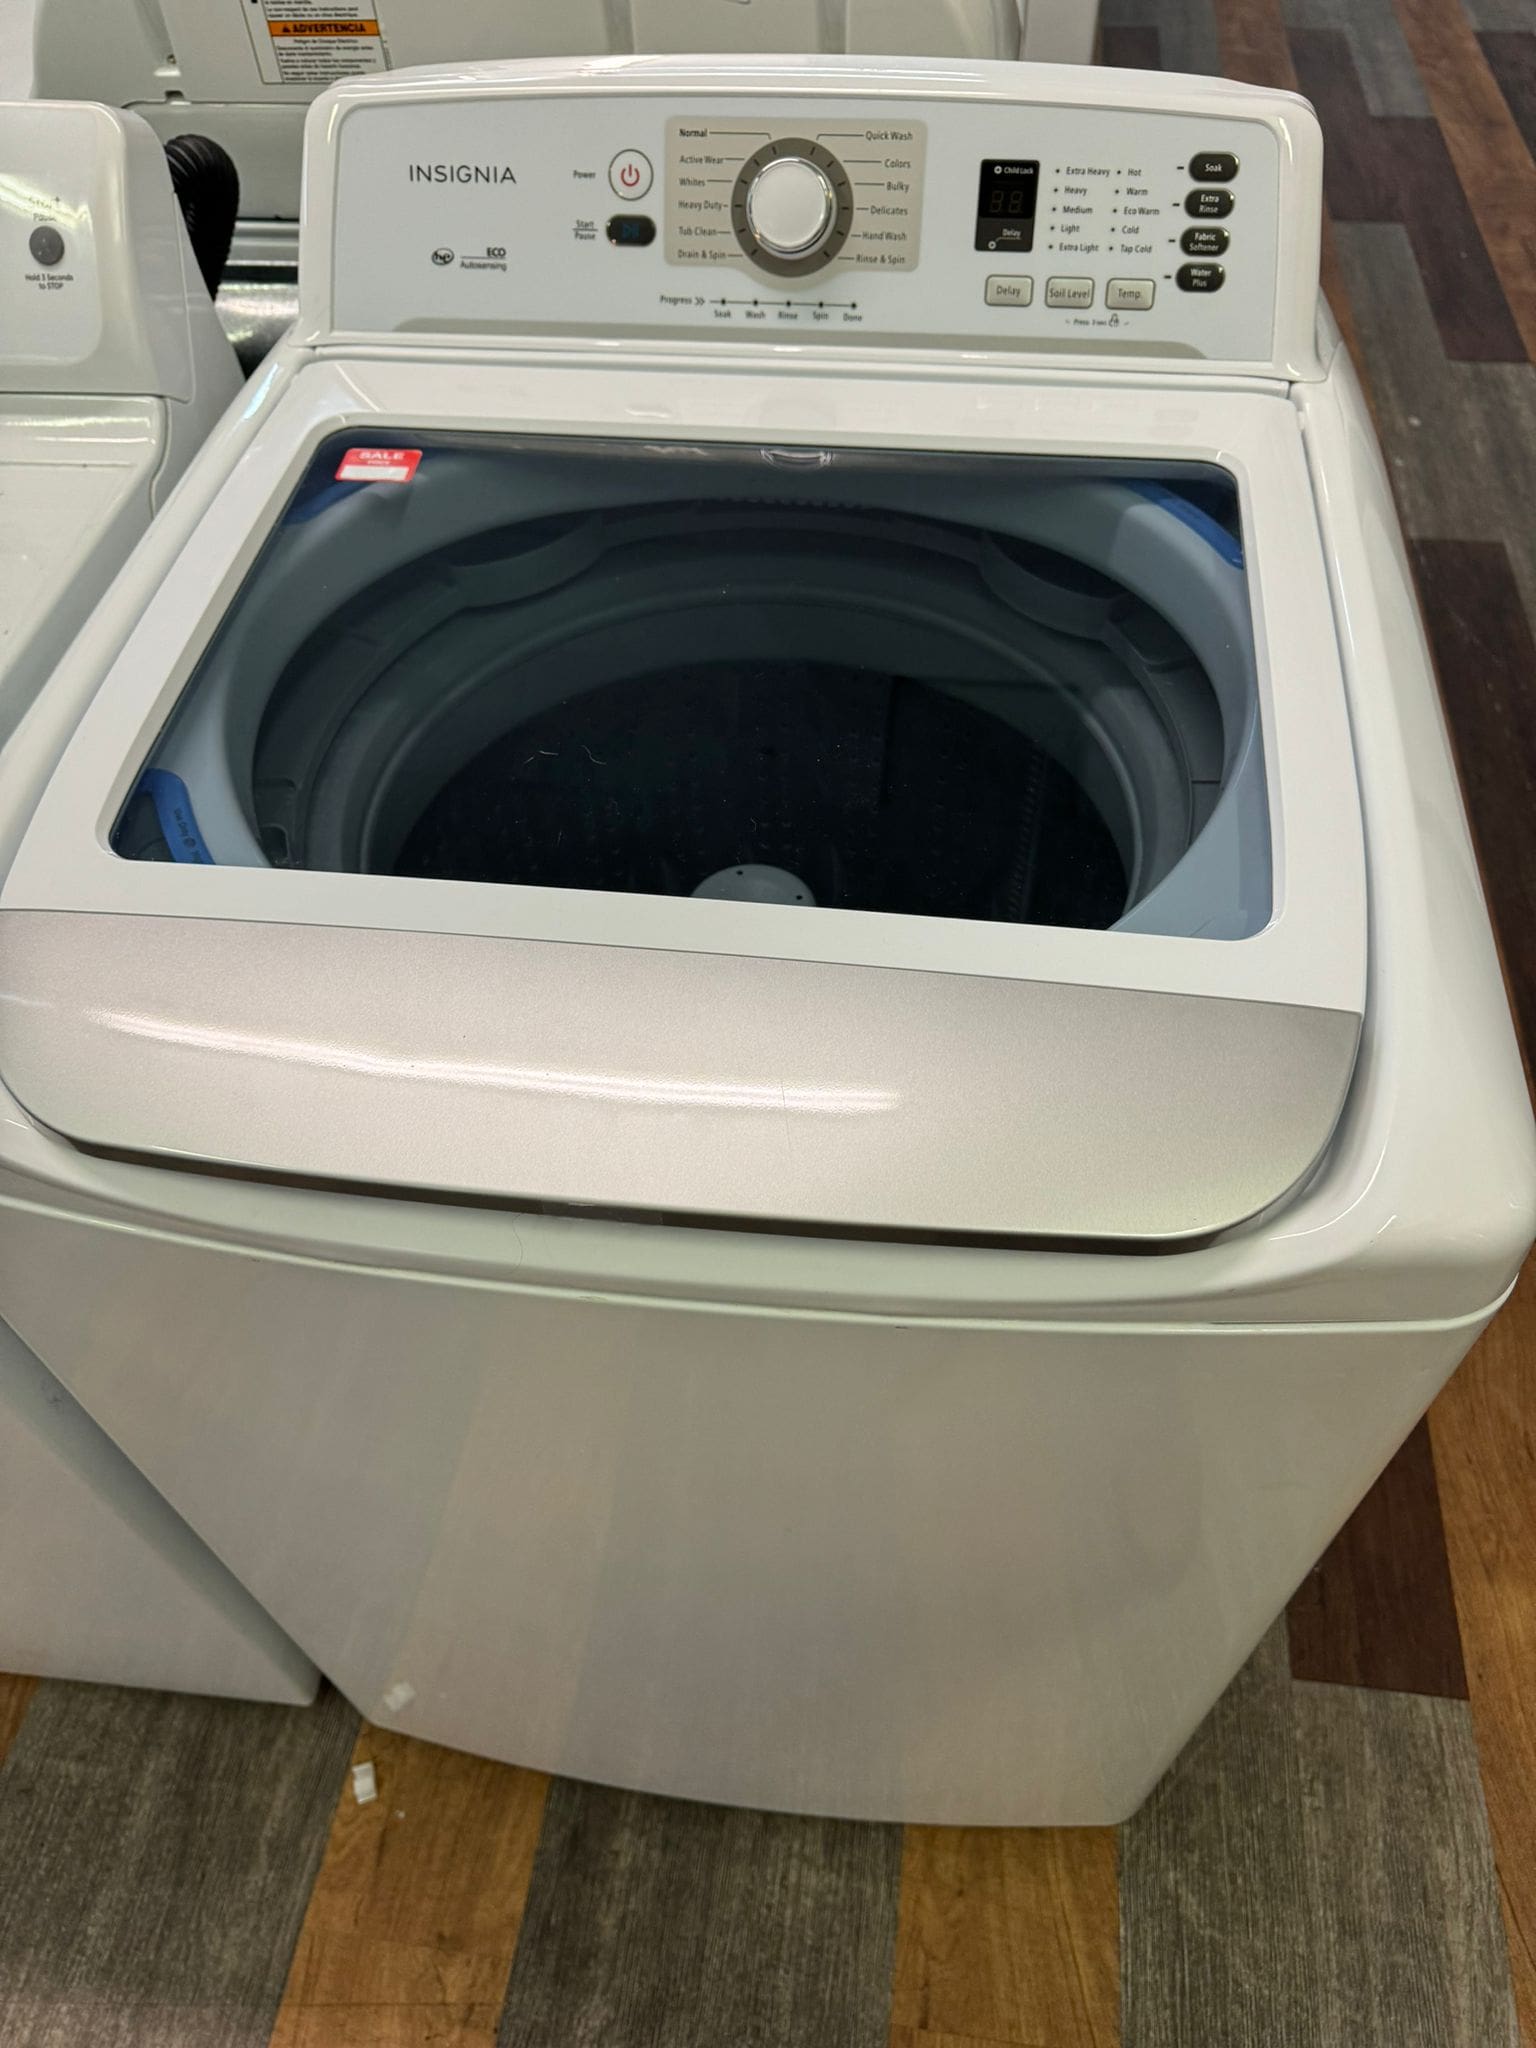 Insignia Like New Top Load Washer – White